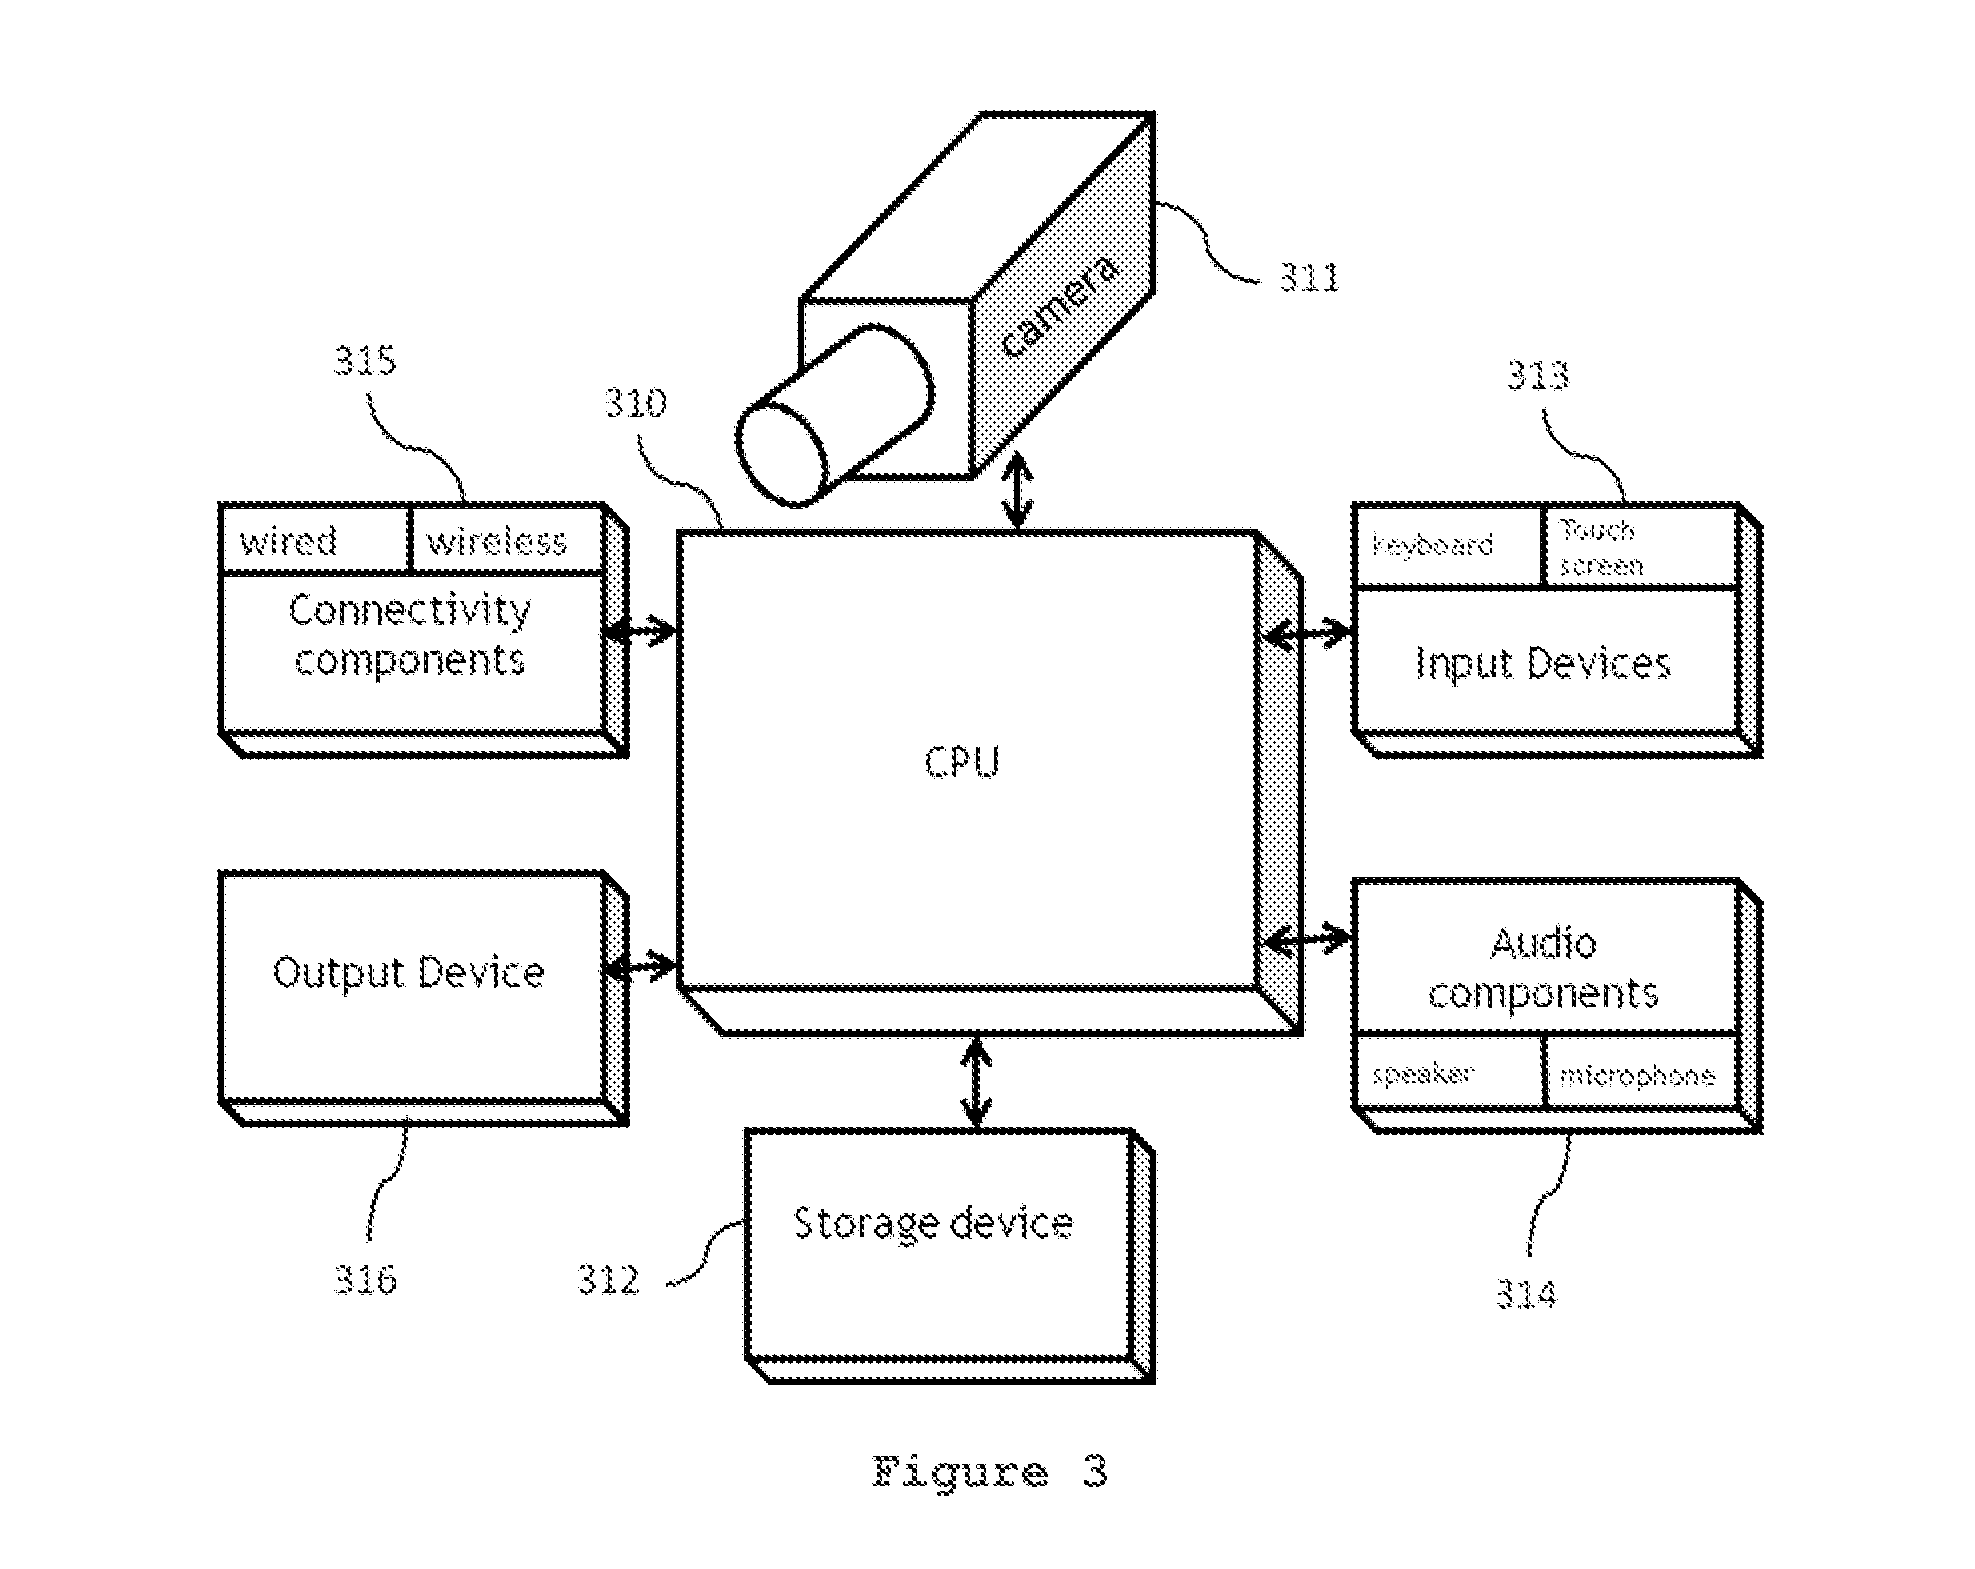 Automatic System and Method for Tracking and Decoding Barcode by Means of Portable Devices having Digital Cameras